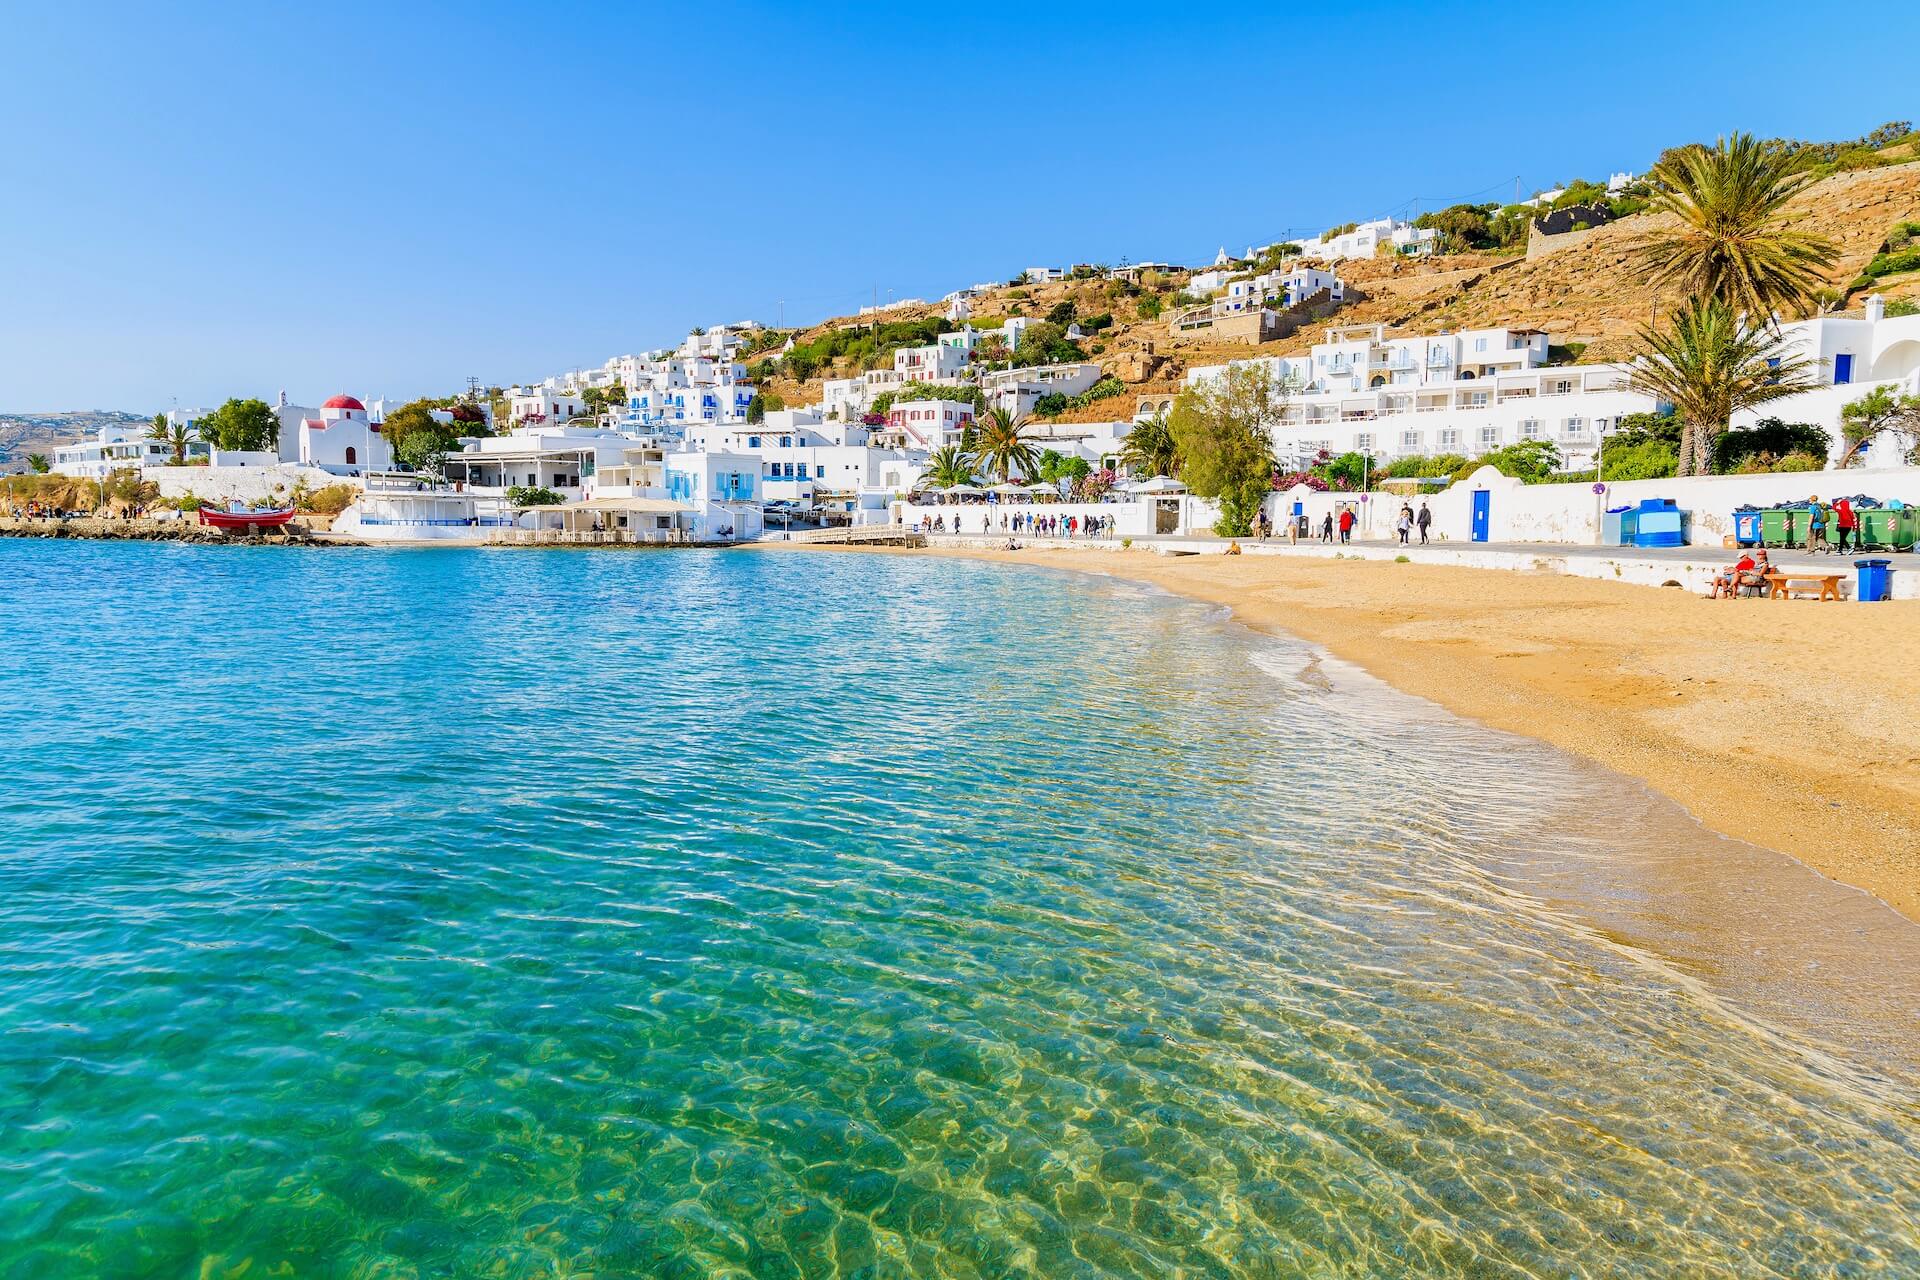 View of the houses on the Mykonos coast